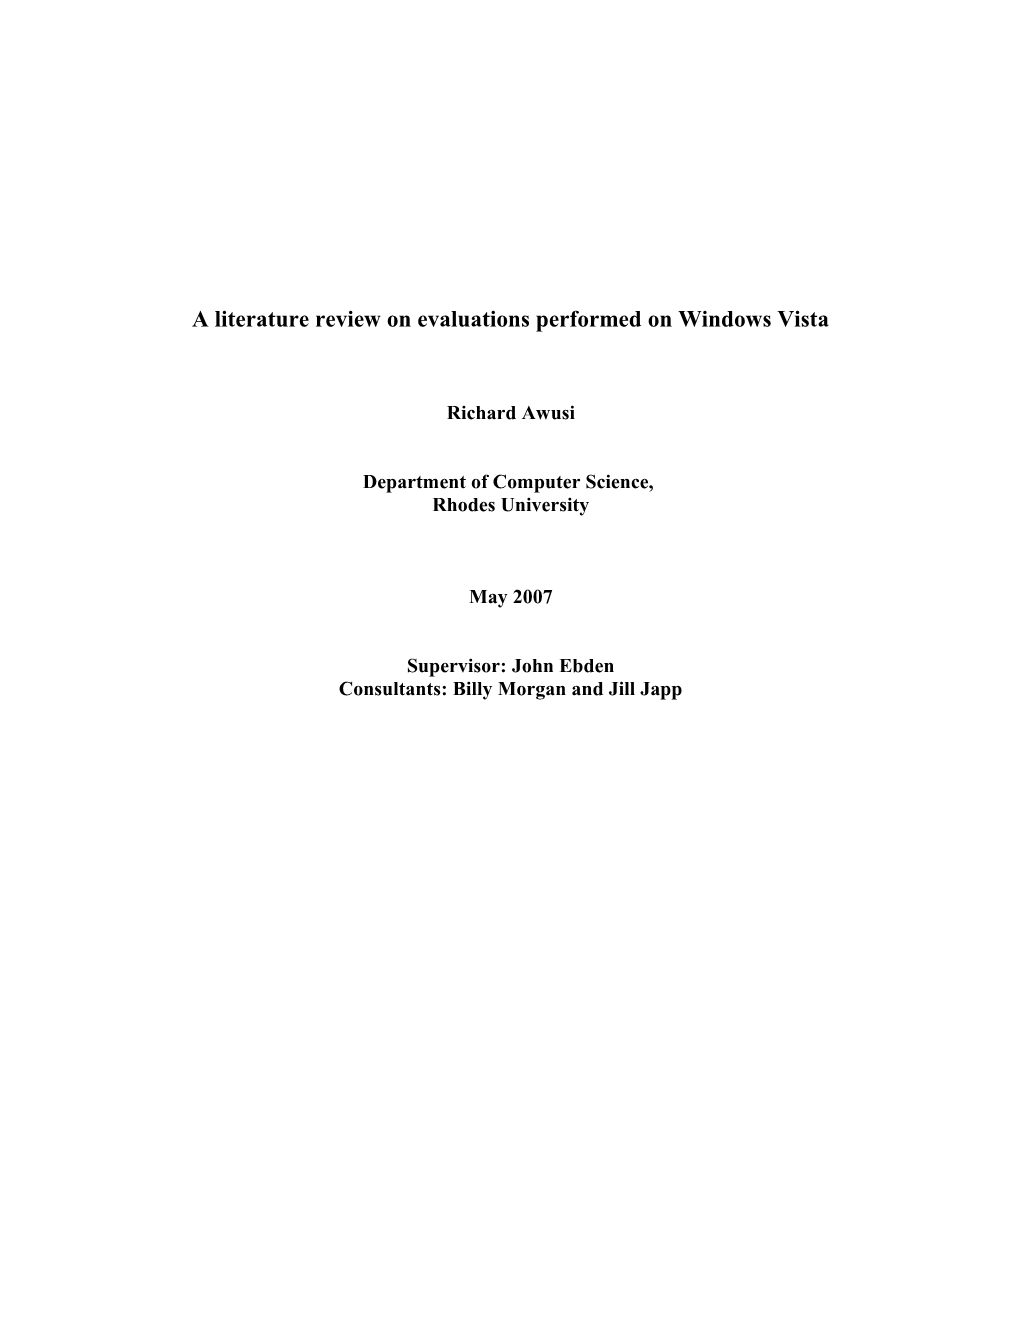 A Literature Review on Evaluations Performed on Windows Vista